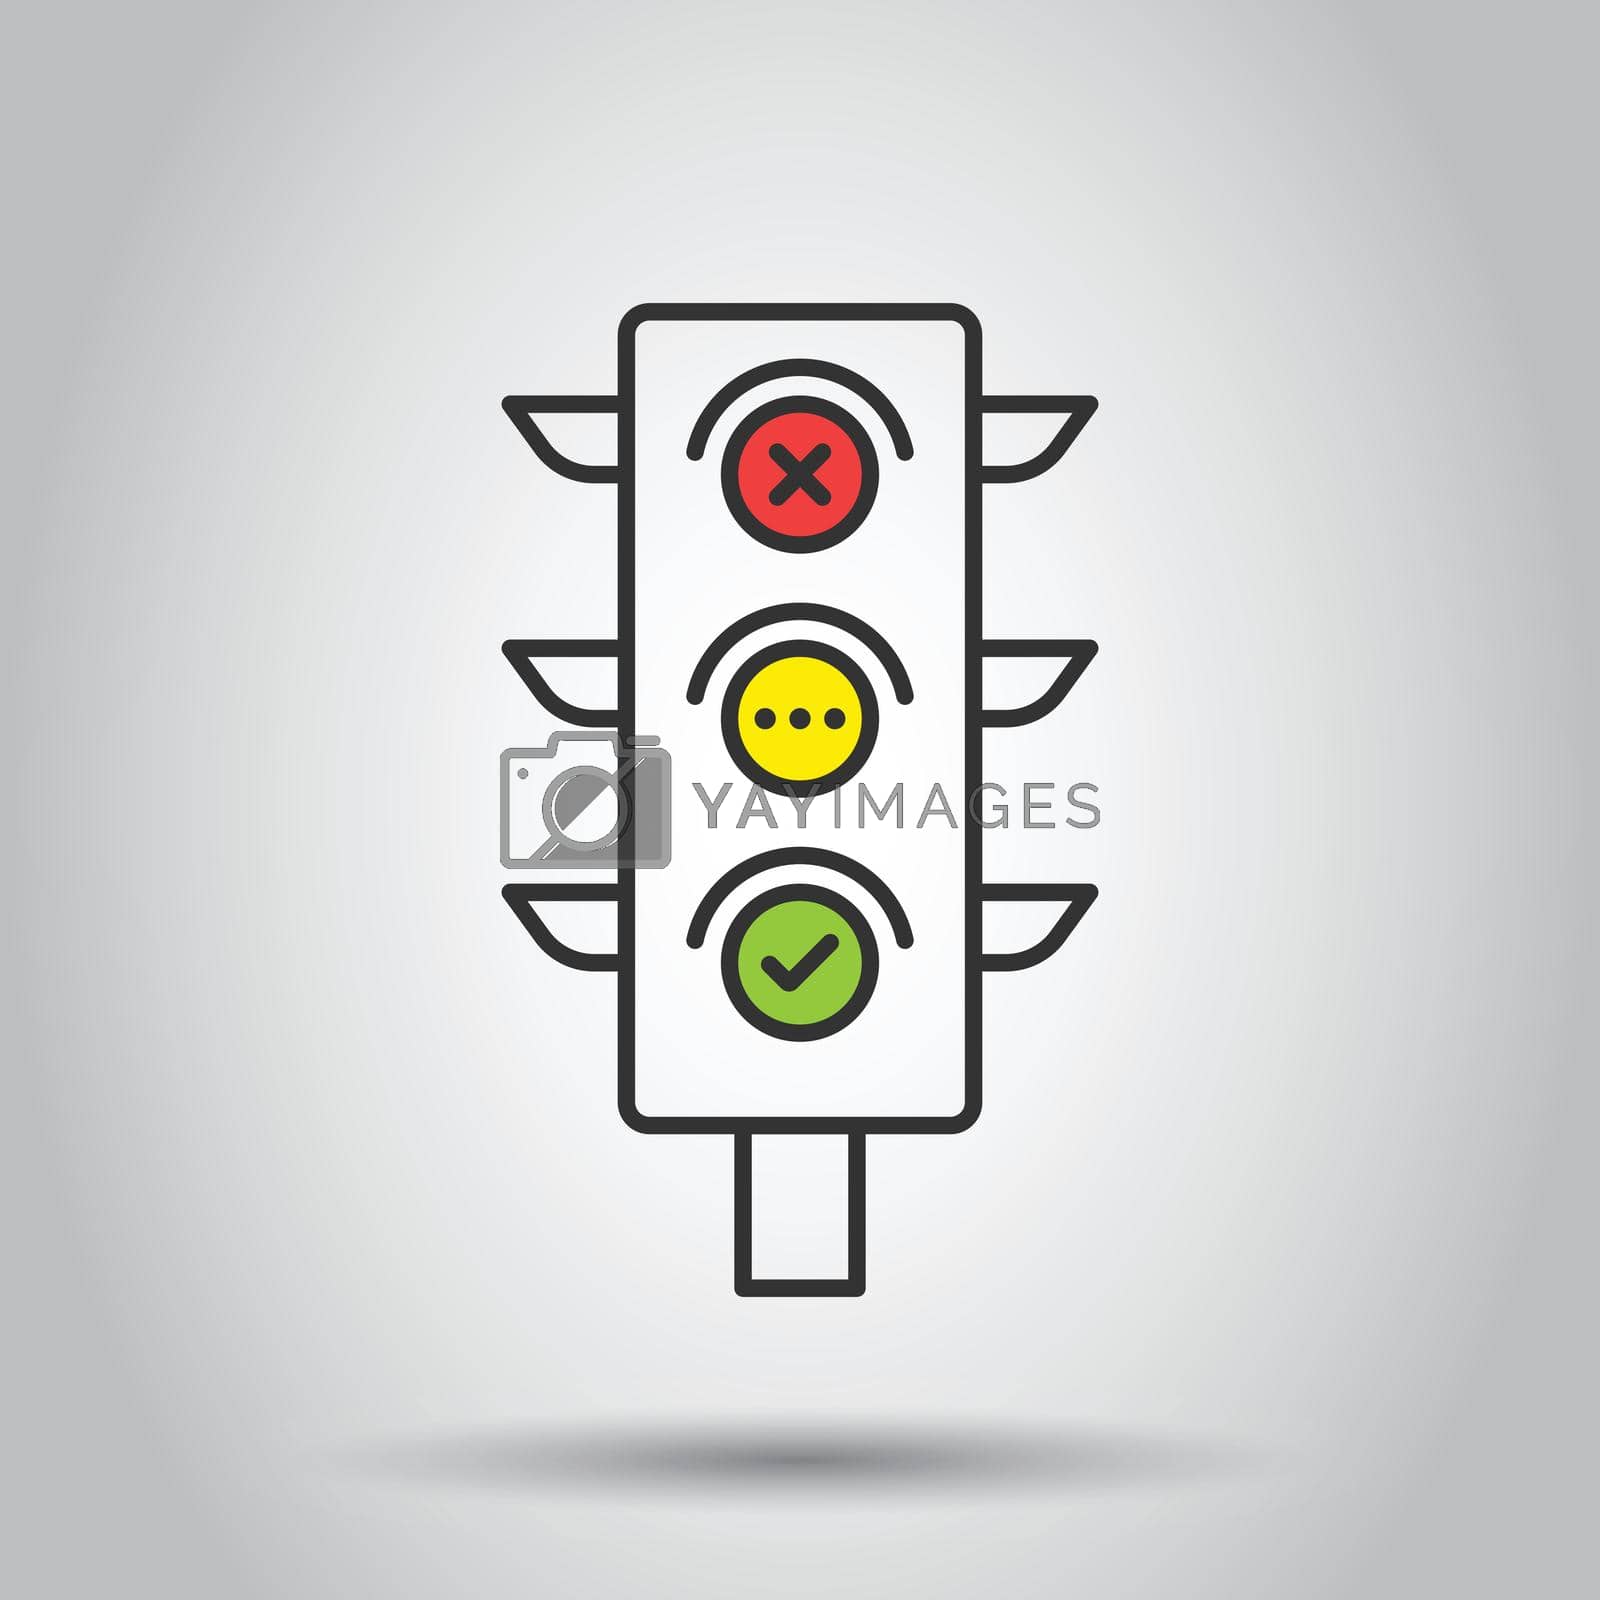 Royalty free image of Semaphore icon in flat style. Traffic light vector illustration on white isolated background. Crossroads business concept. by LysenkoA